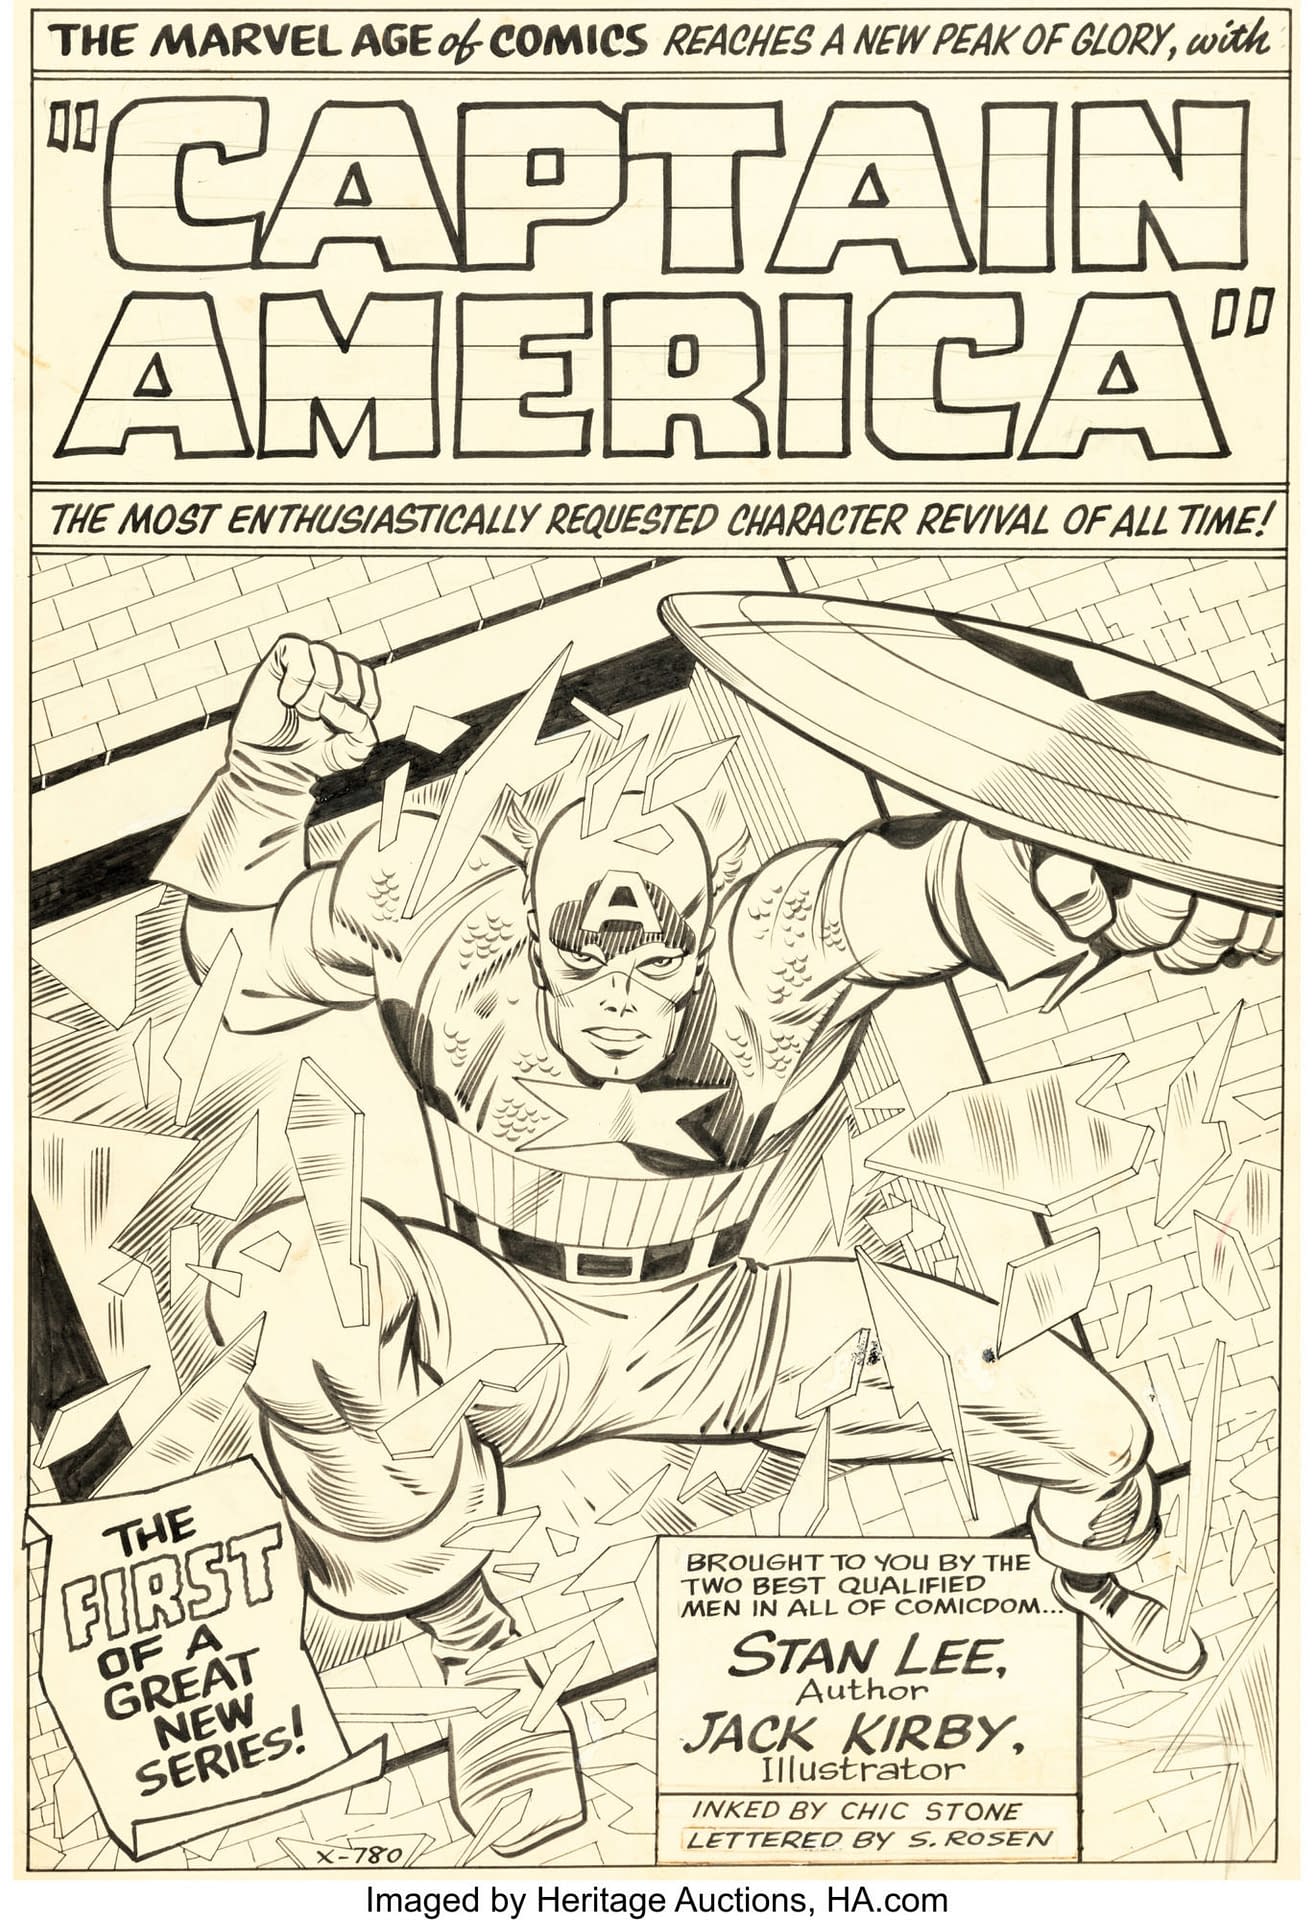 Jack Kirby Original Captain America Art Page Sells For $630,000